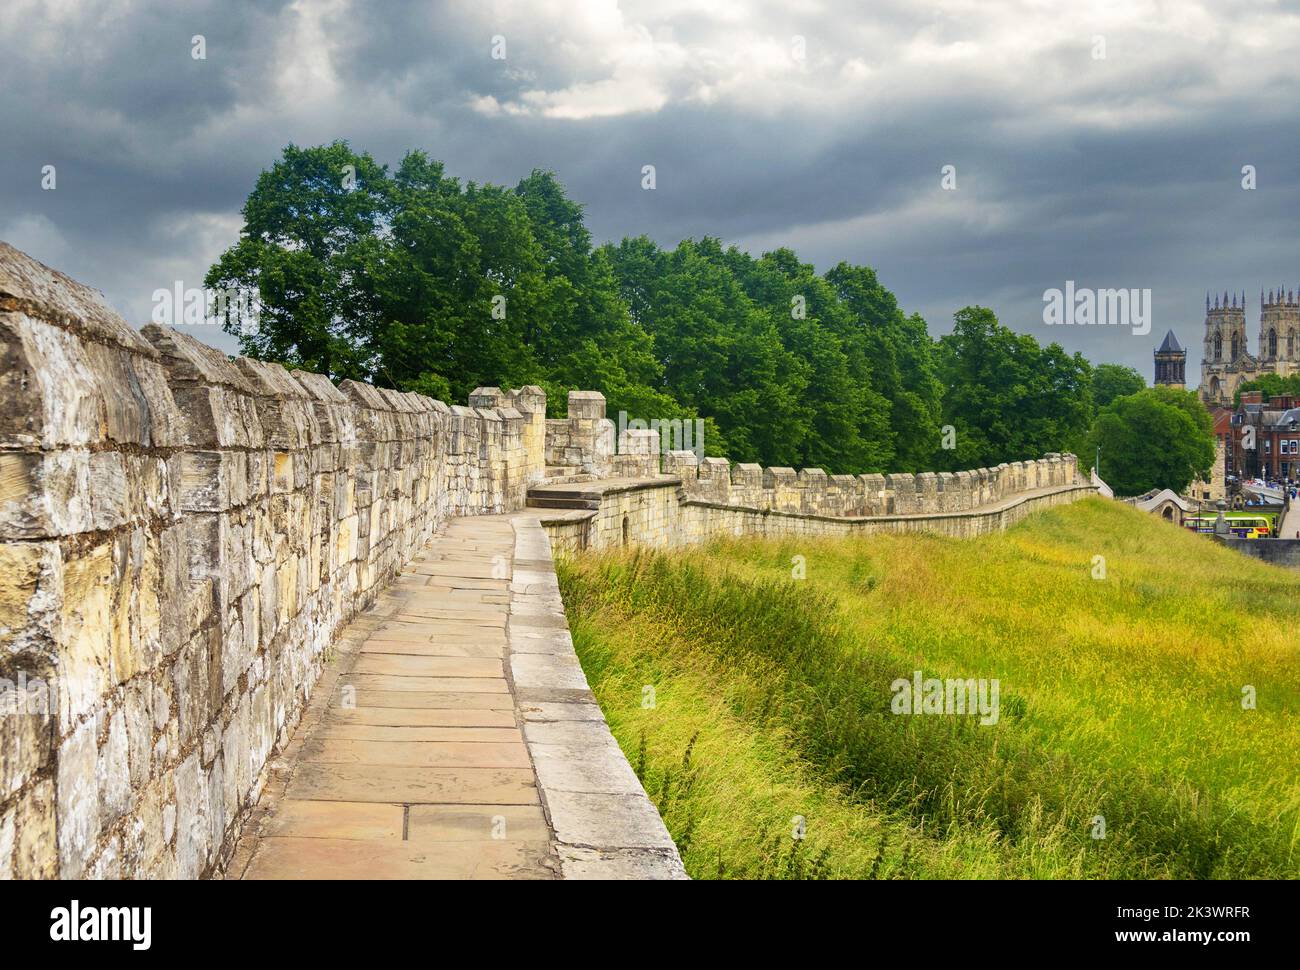 The old Roman wall in York, England Stock Photo